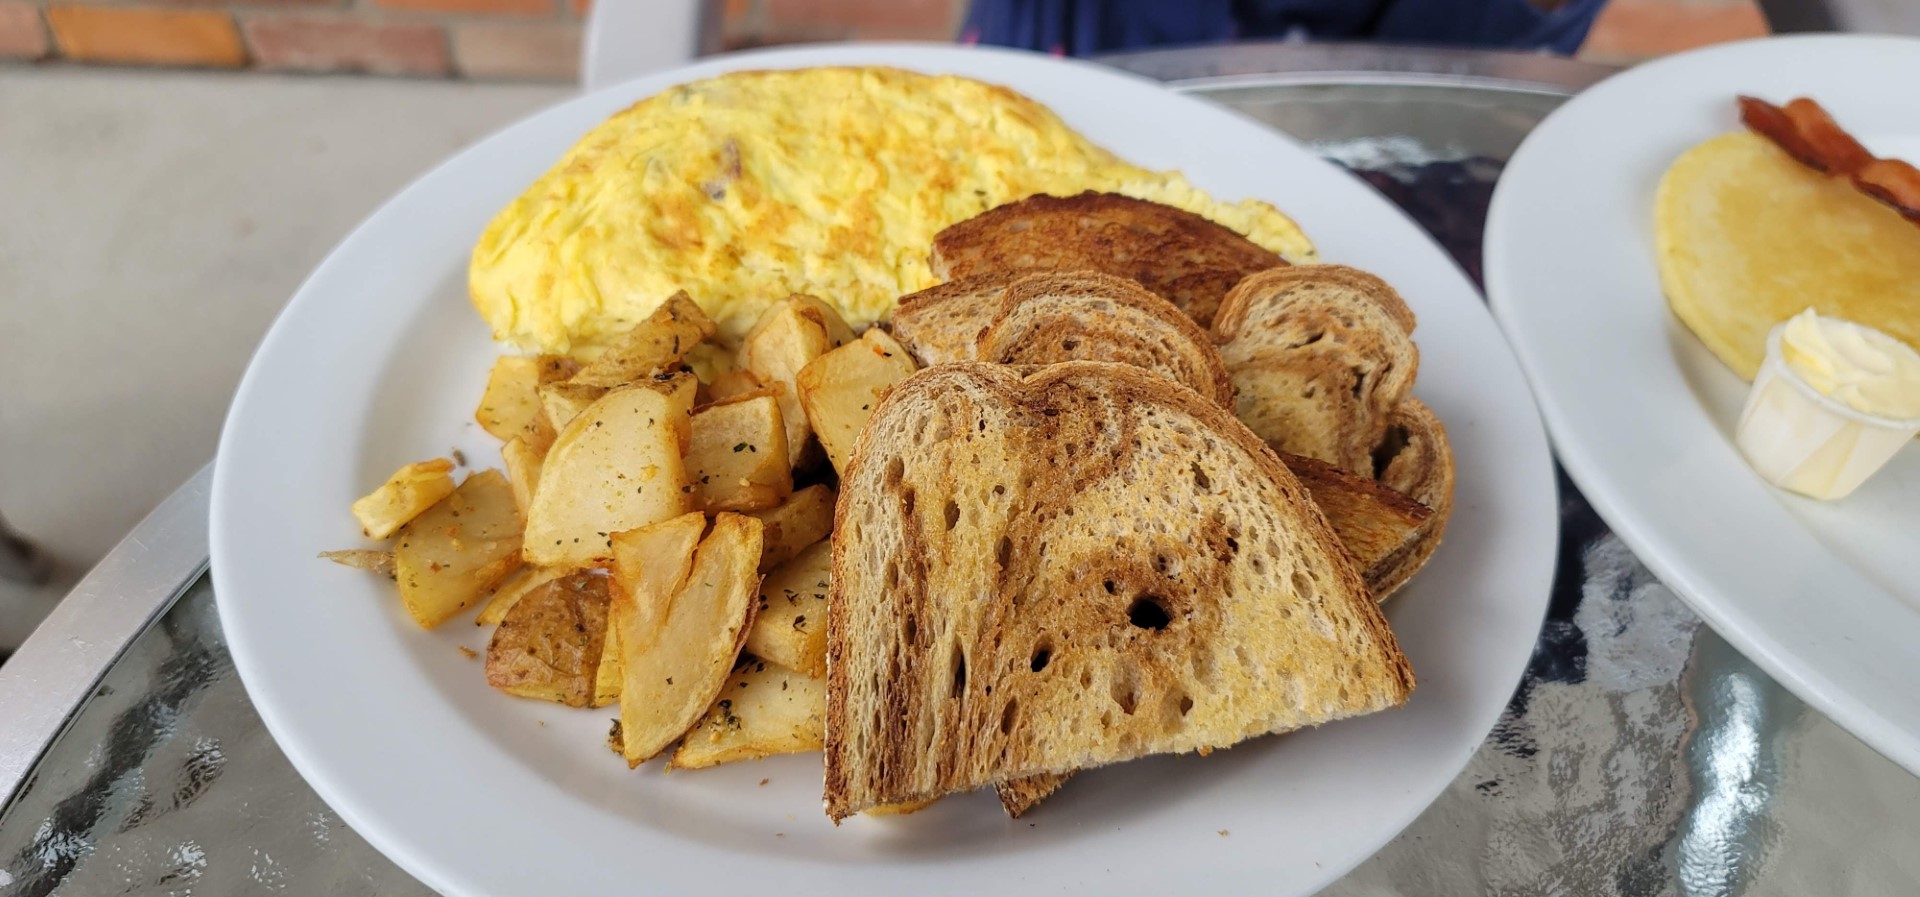 toast, home fries and omlette